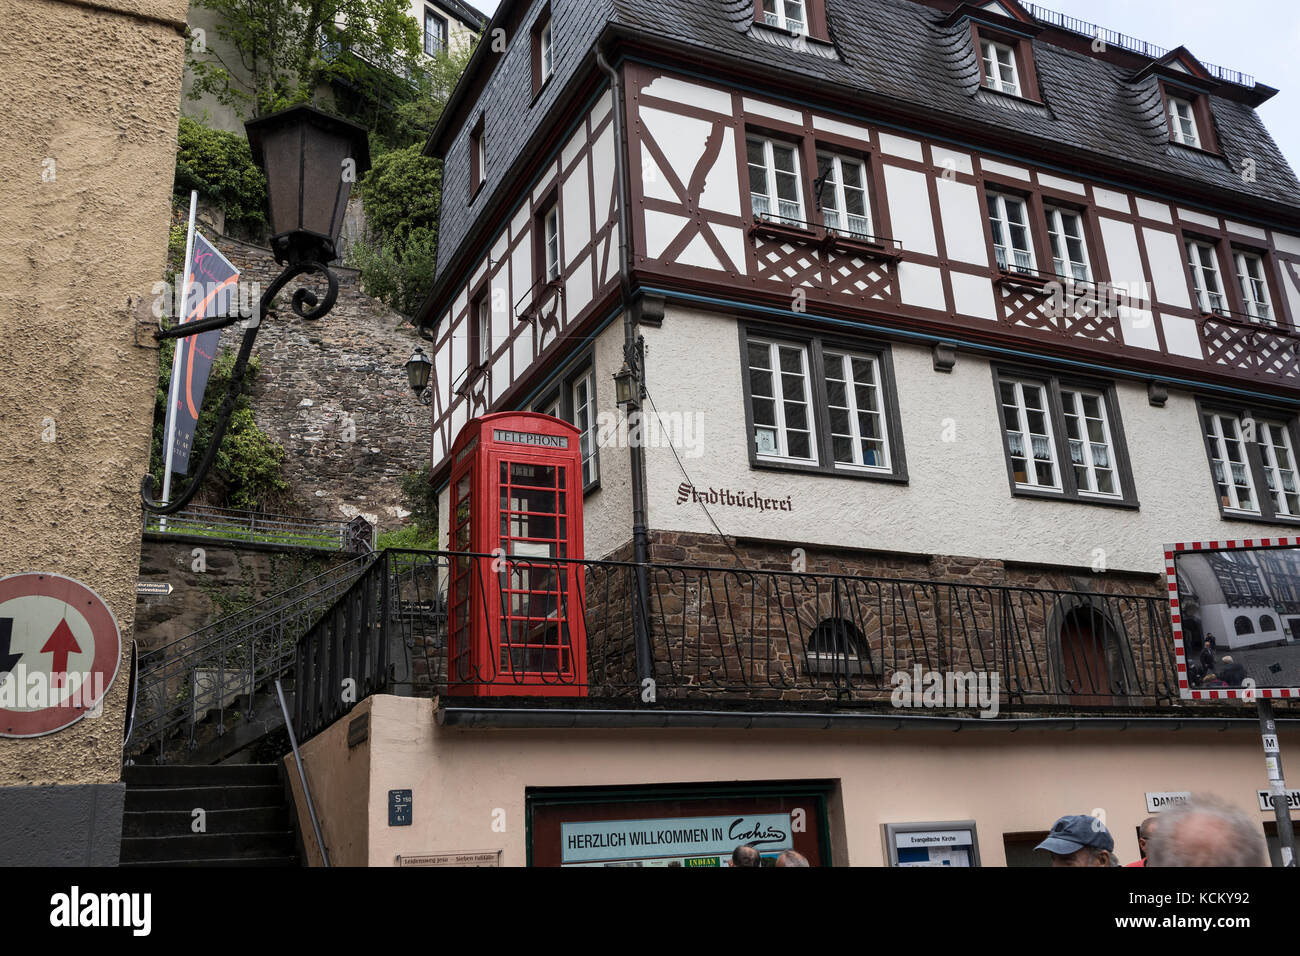 A UK Telephone Box in The town of Cochem, in the Mosel Valley, Germany Stock Photo